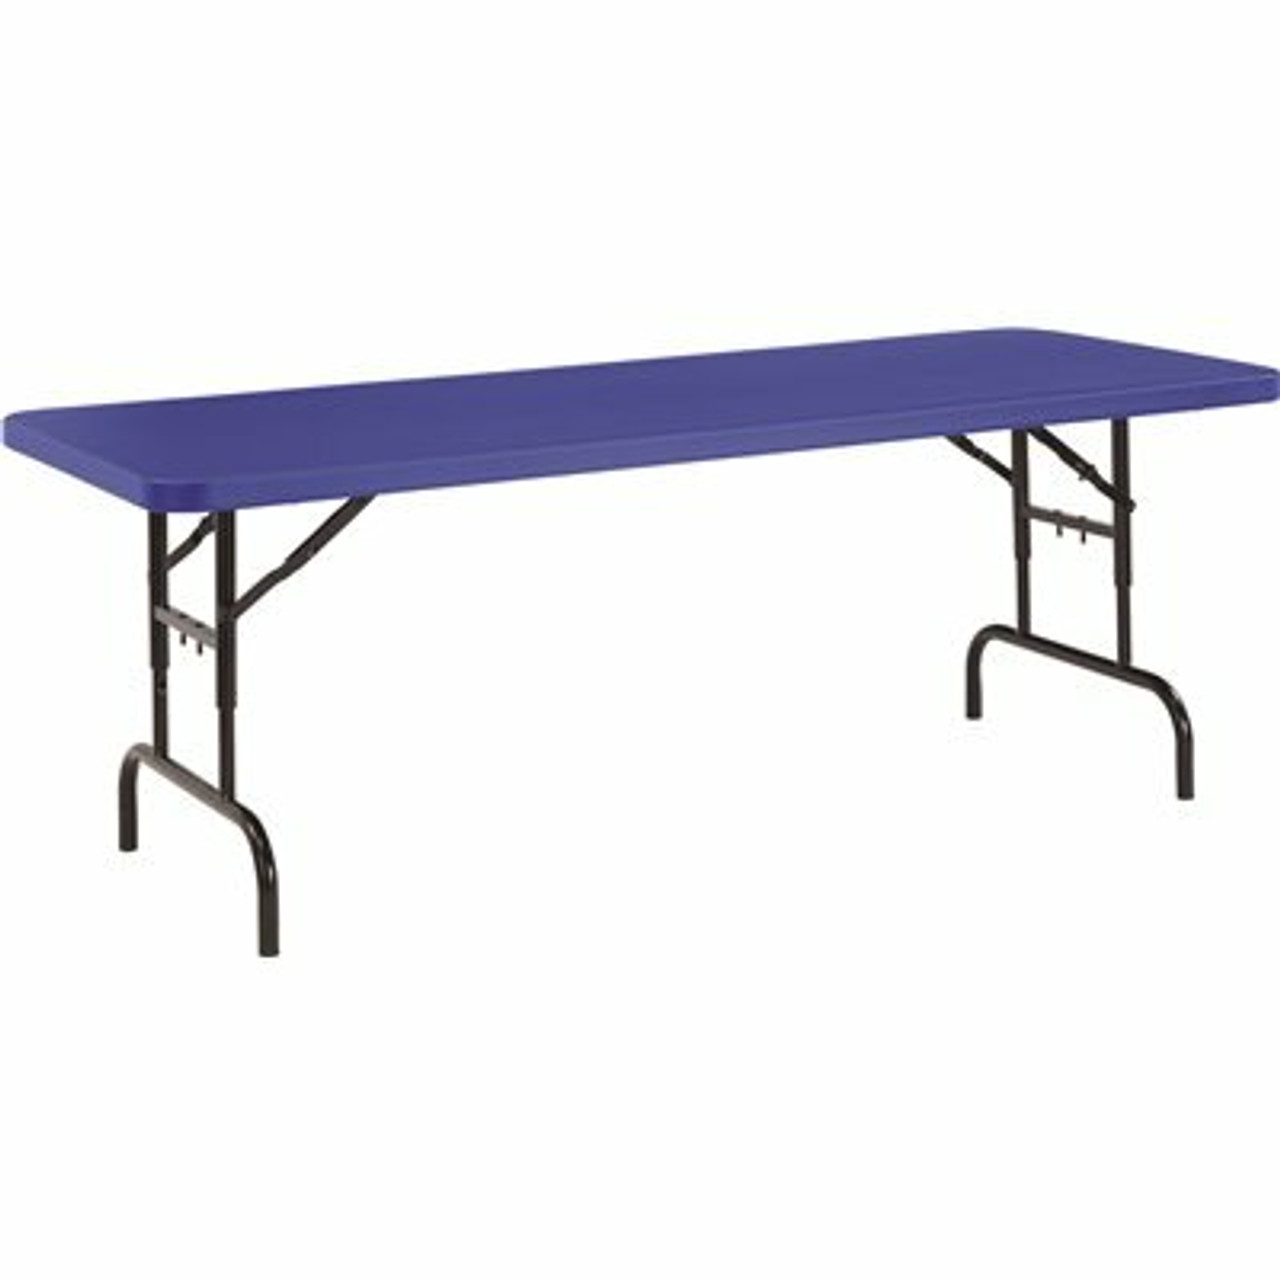 National Public Seating 72 In. Blue Plastic Adjustable Height Folding High Top Table